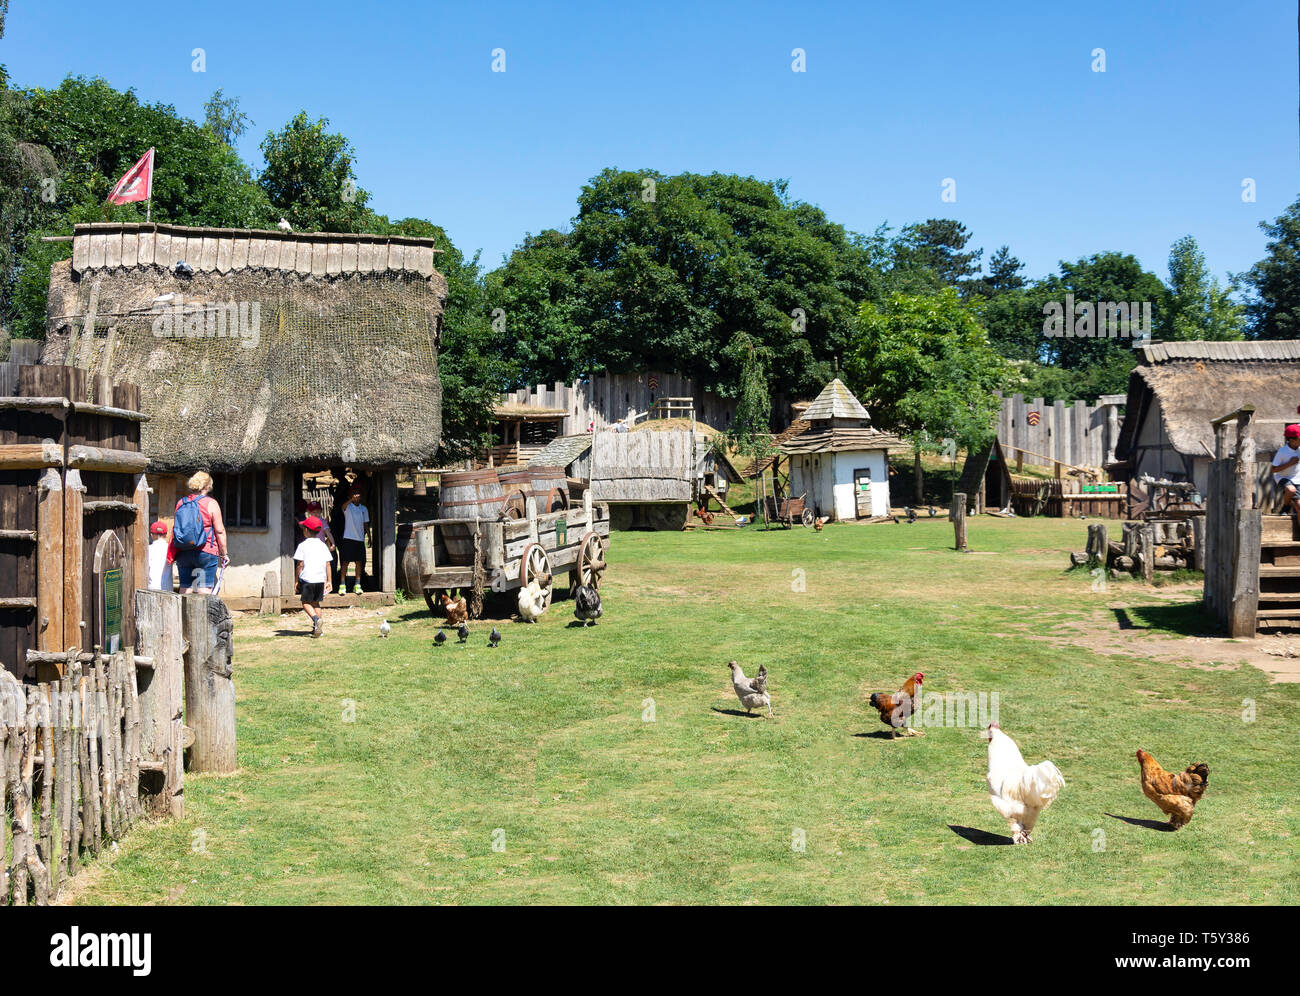 Dwellings inside ramparts in Mountfitchet Castle, Stansted Mountfitchet, Essex, England, United Kingdom Stock Photo